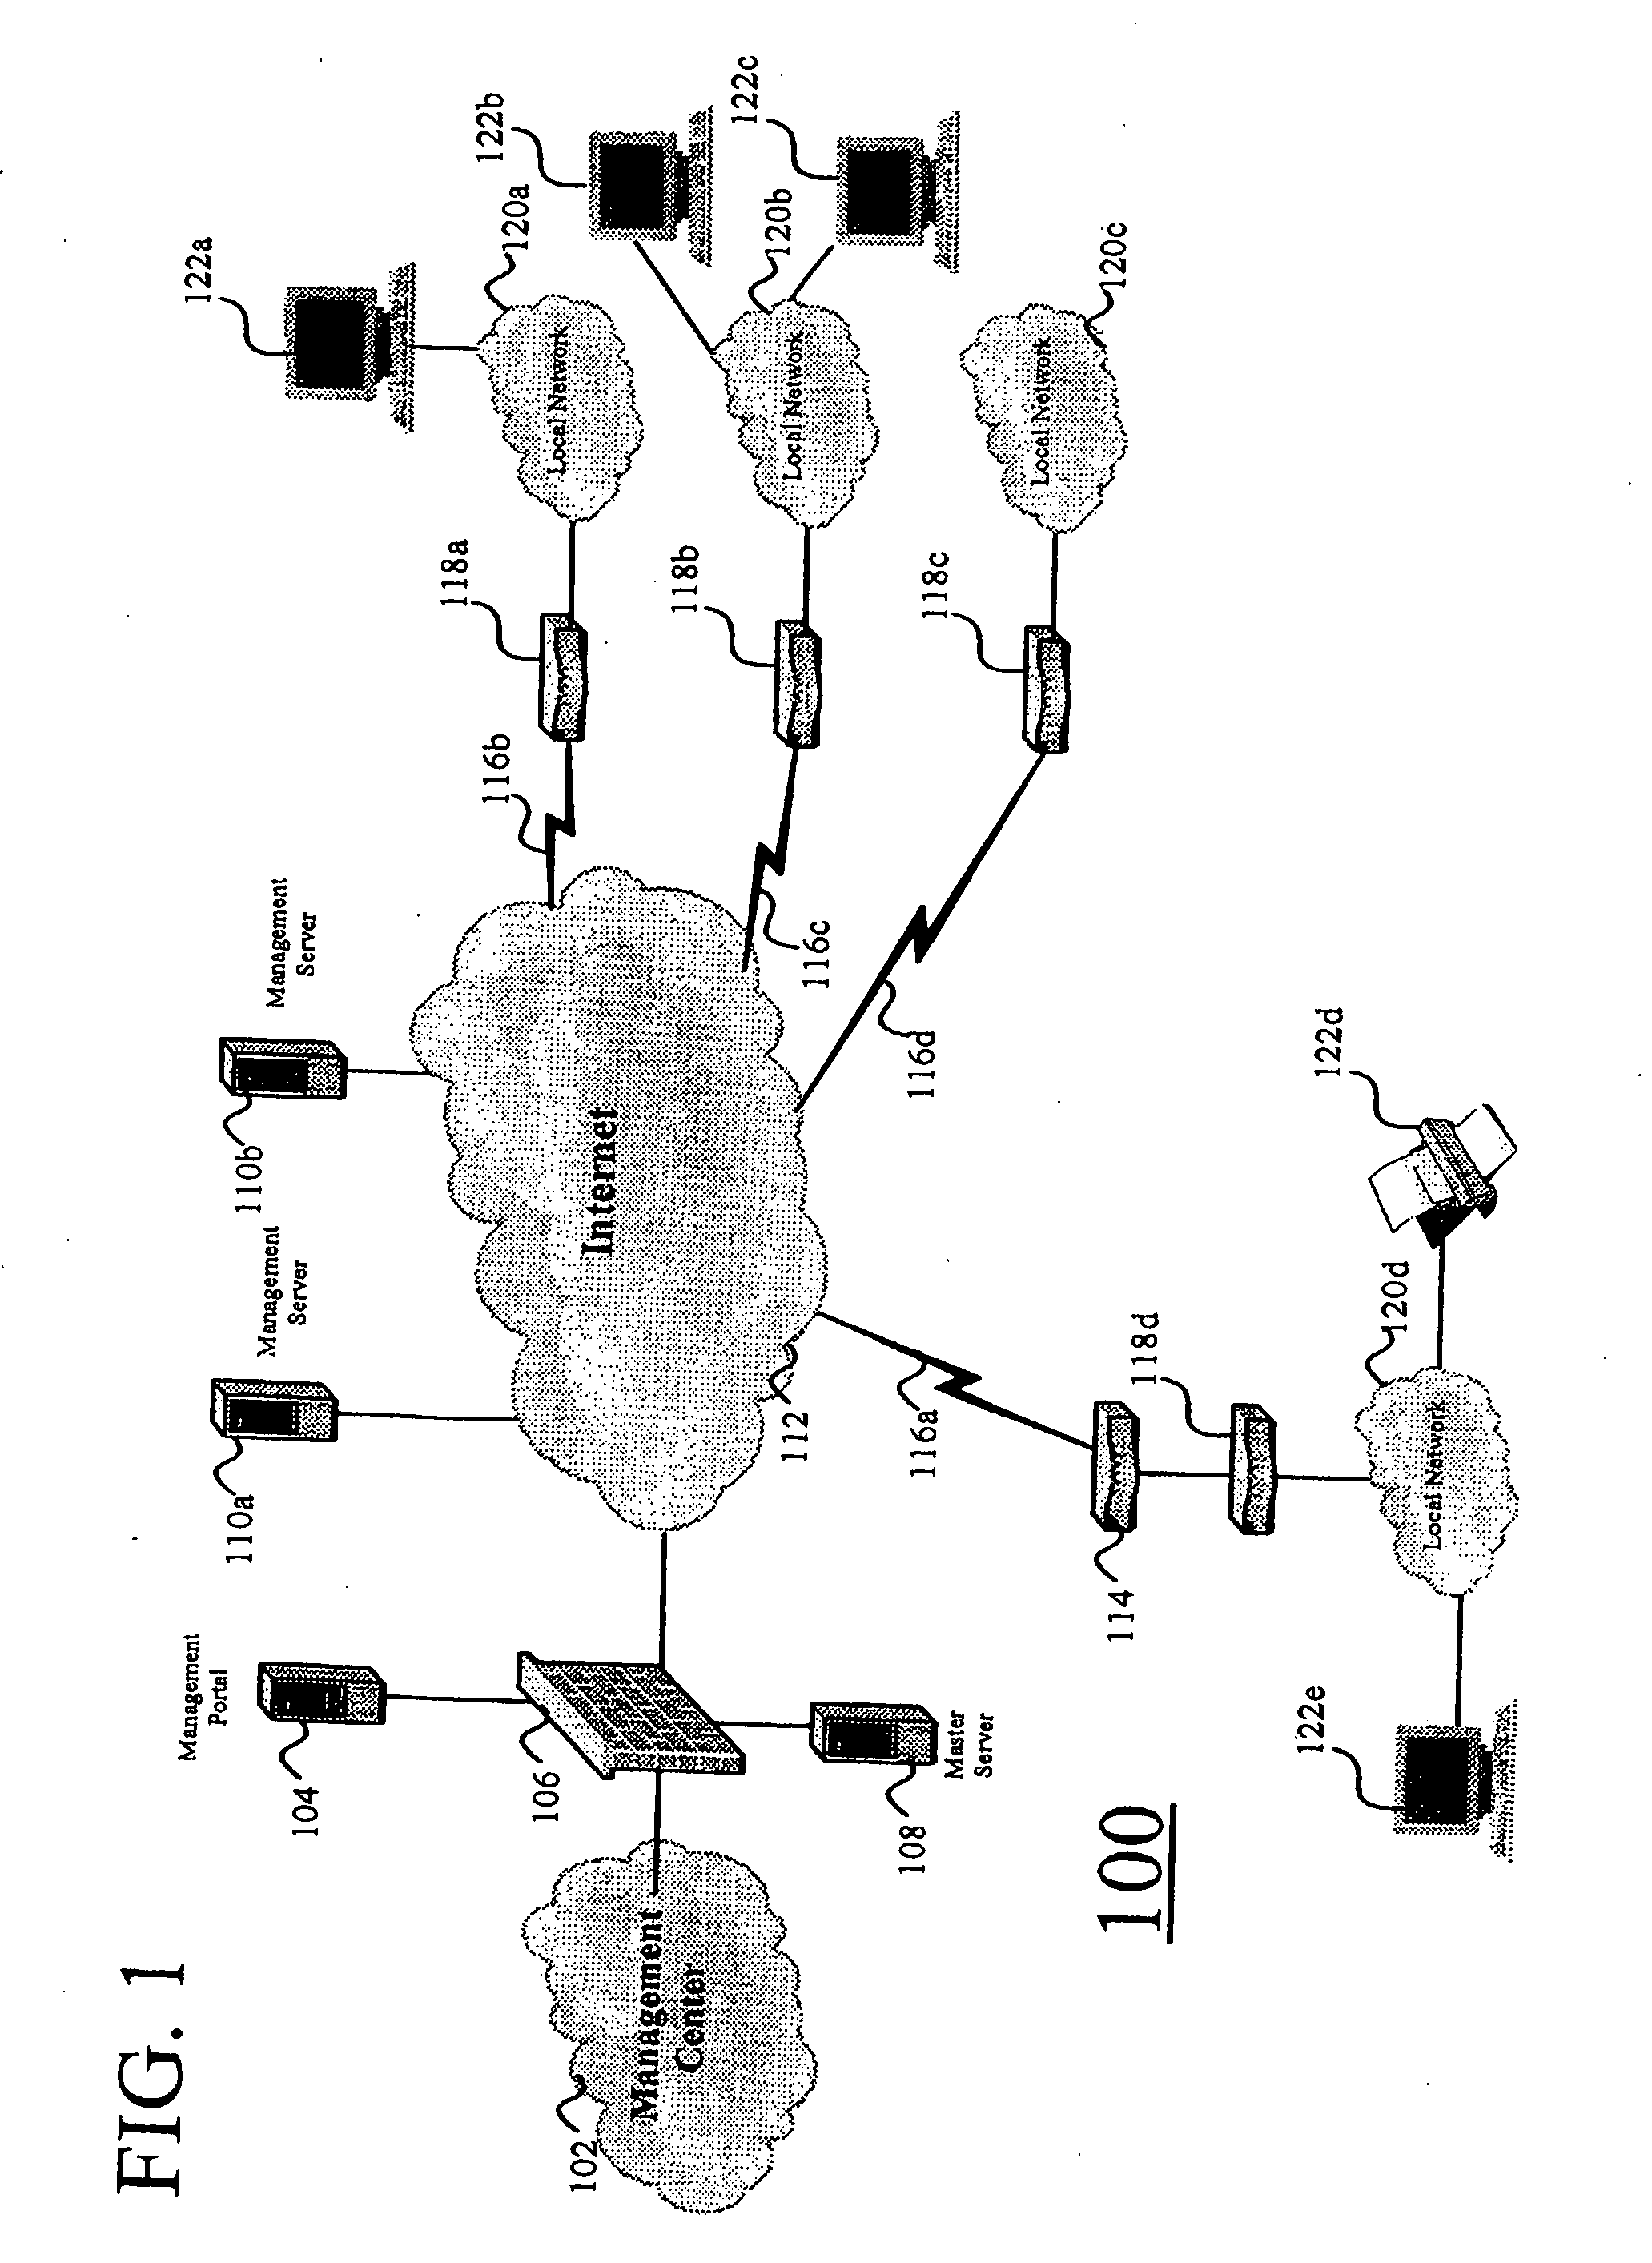 Systems and methods for automatically configuring network devices